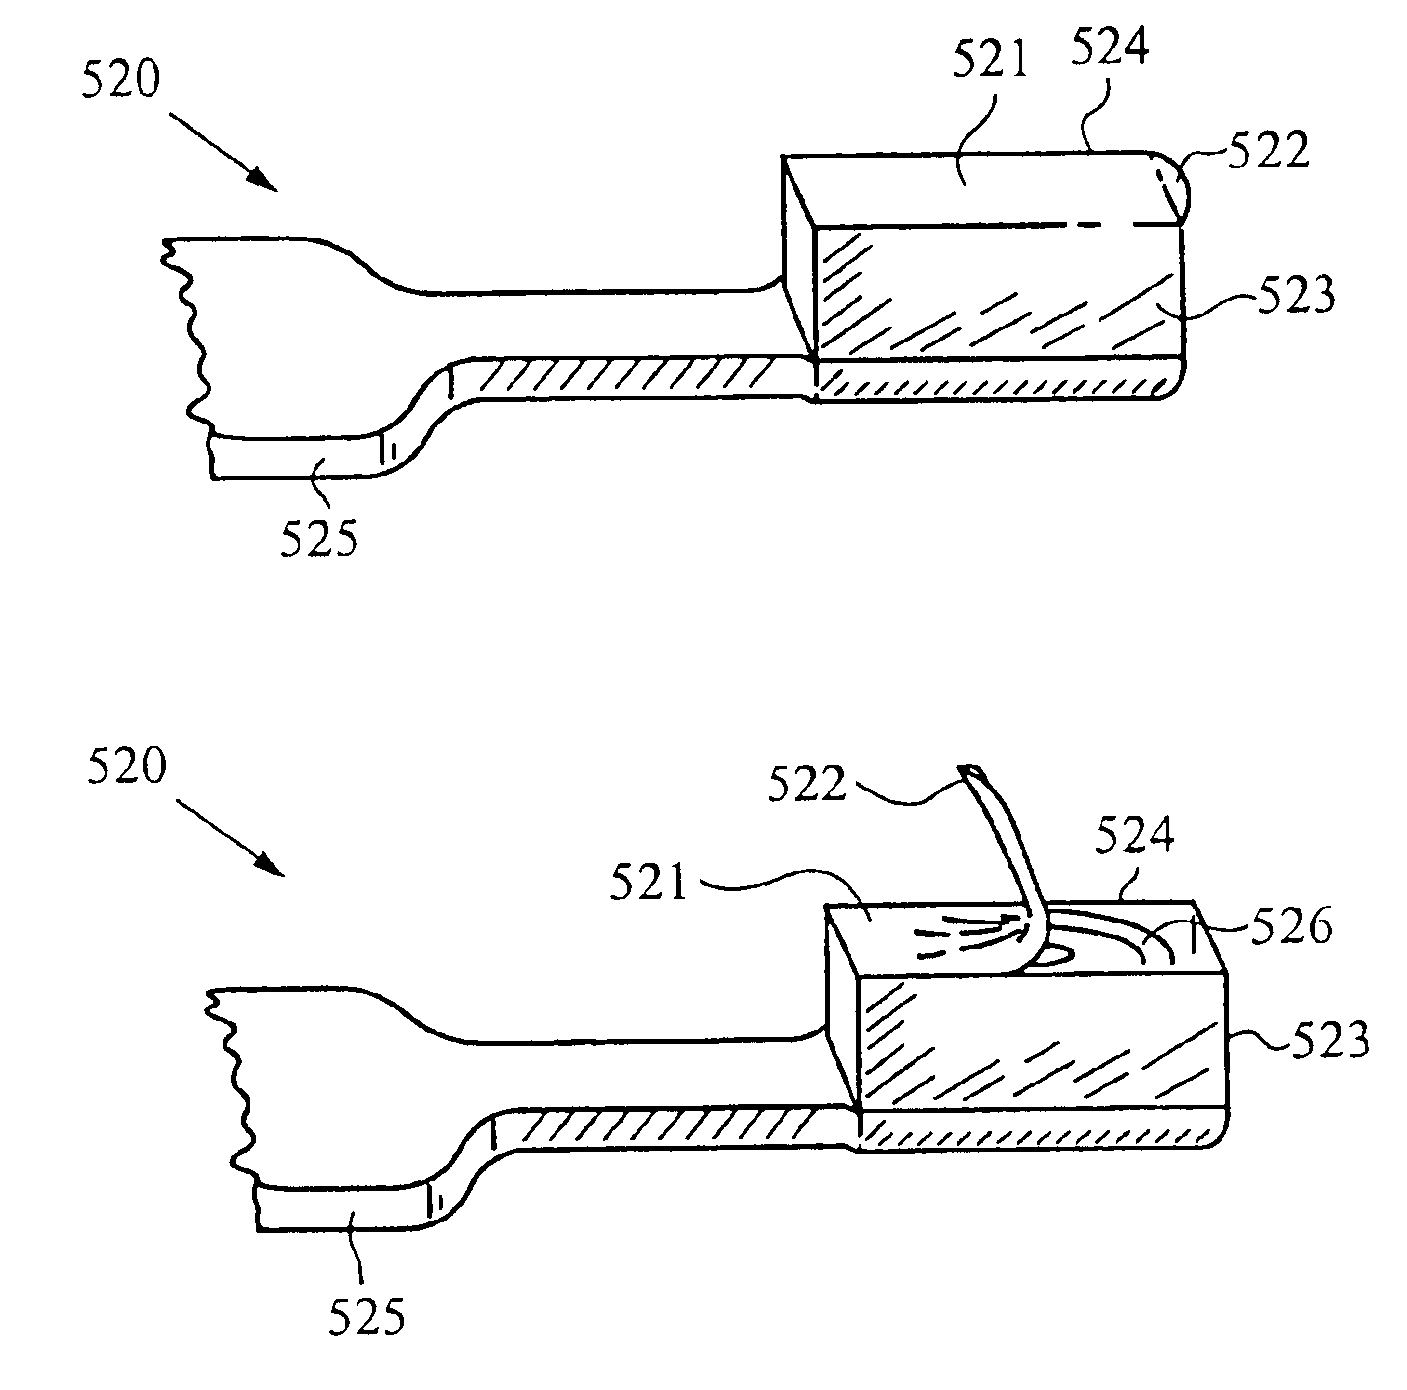 Dentition cleaning device and system